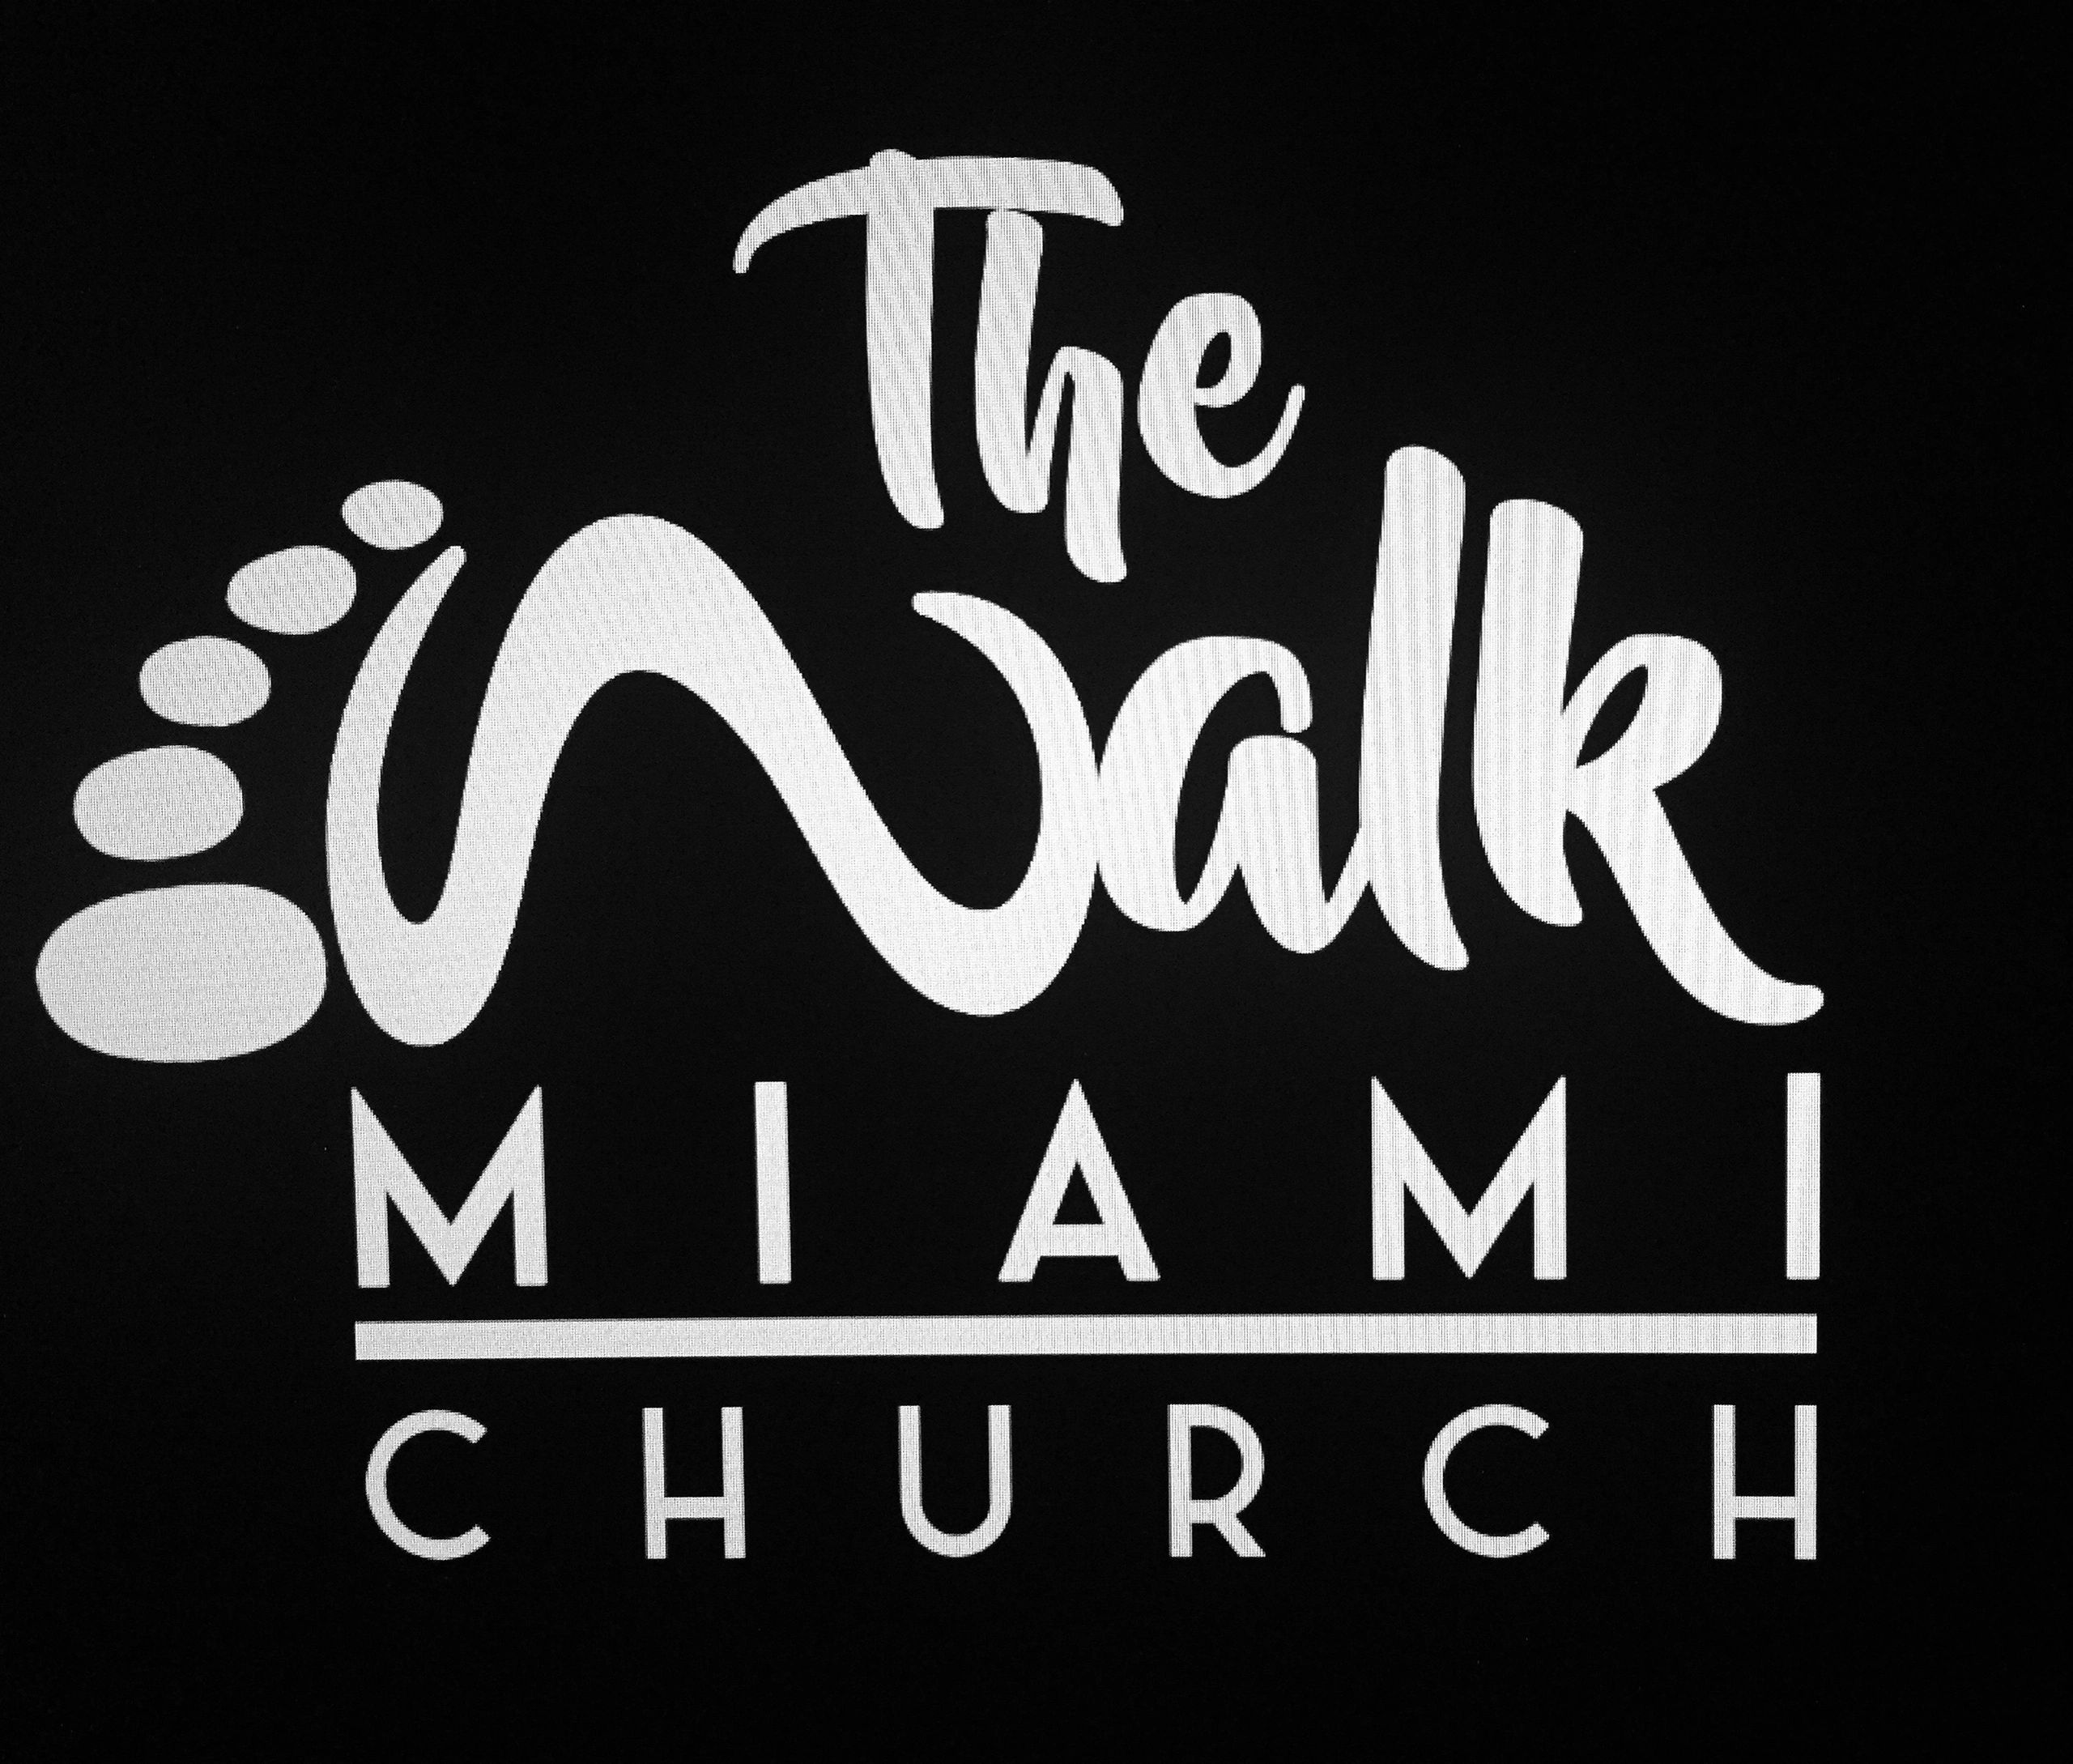 The Walk Miami Church 
“Let’s walk out life together with God”